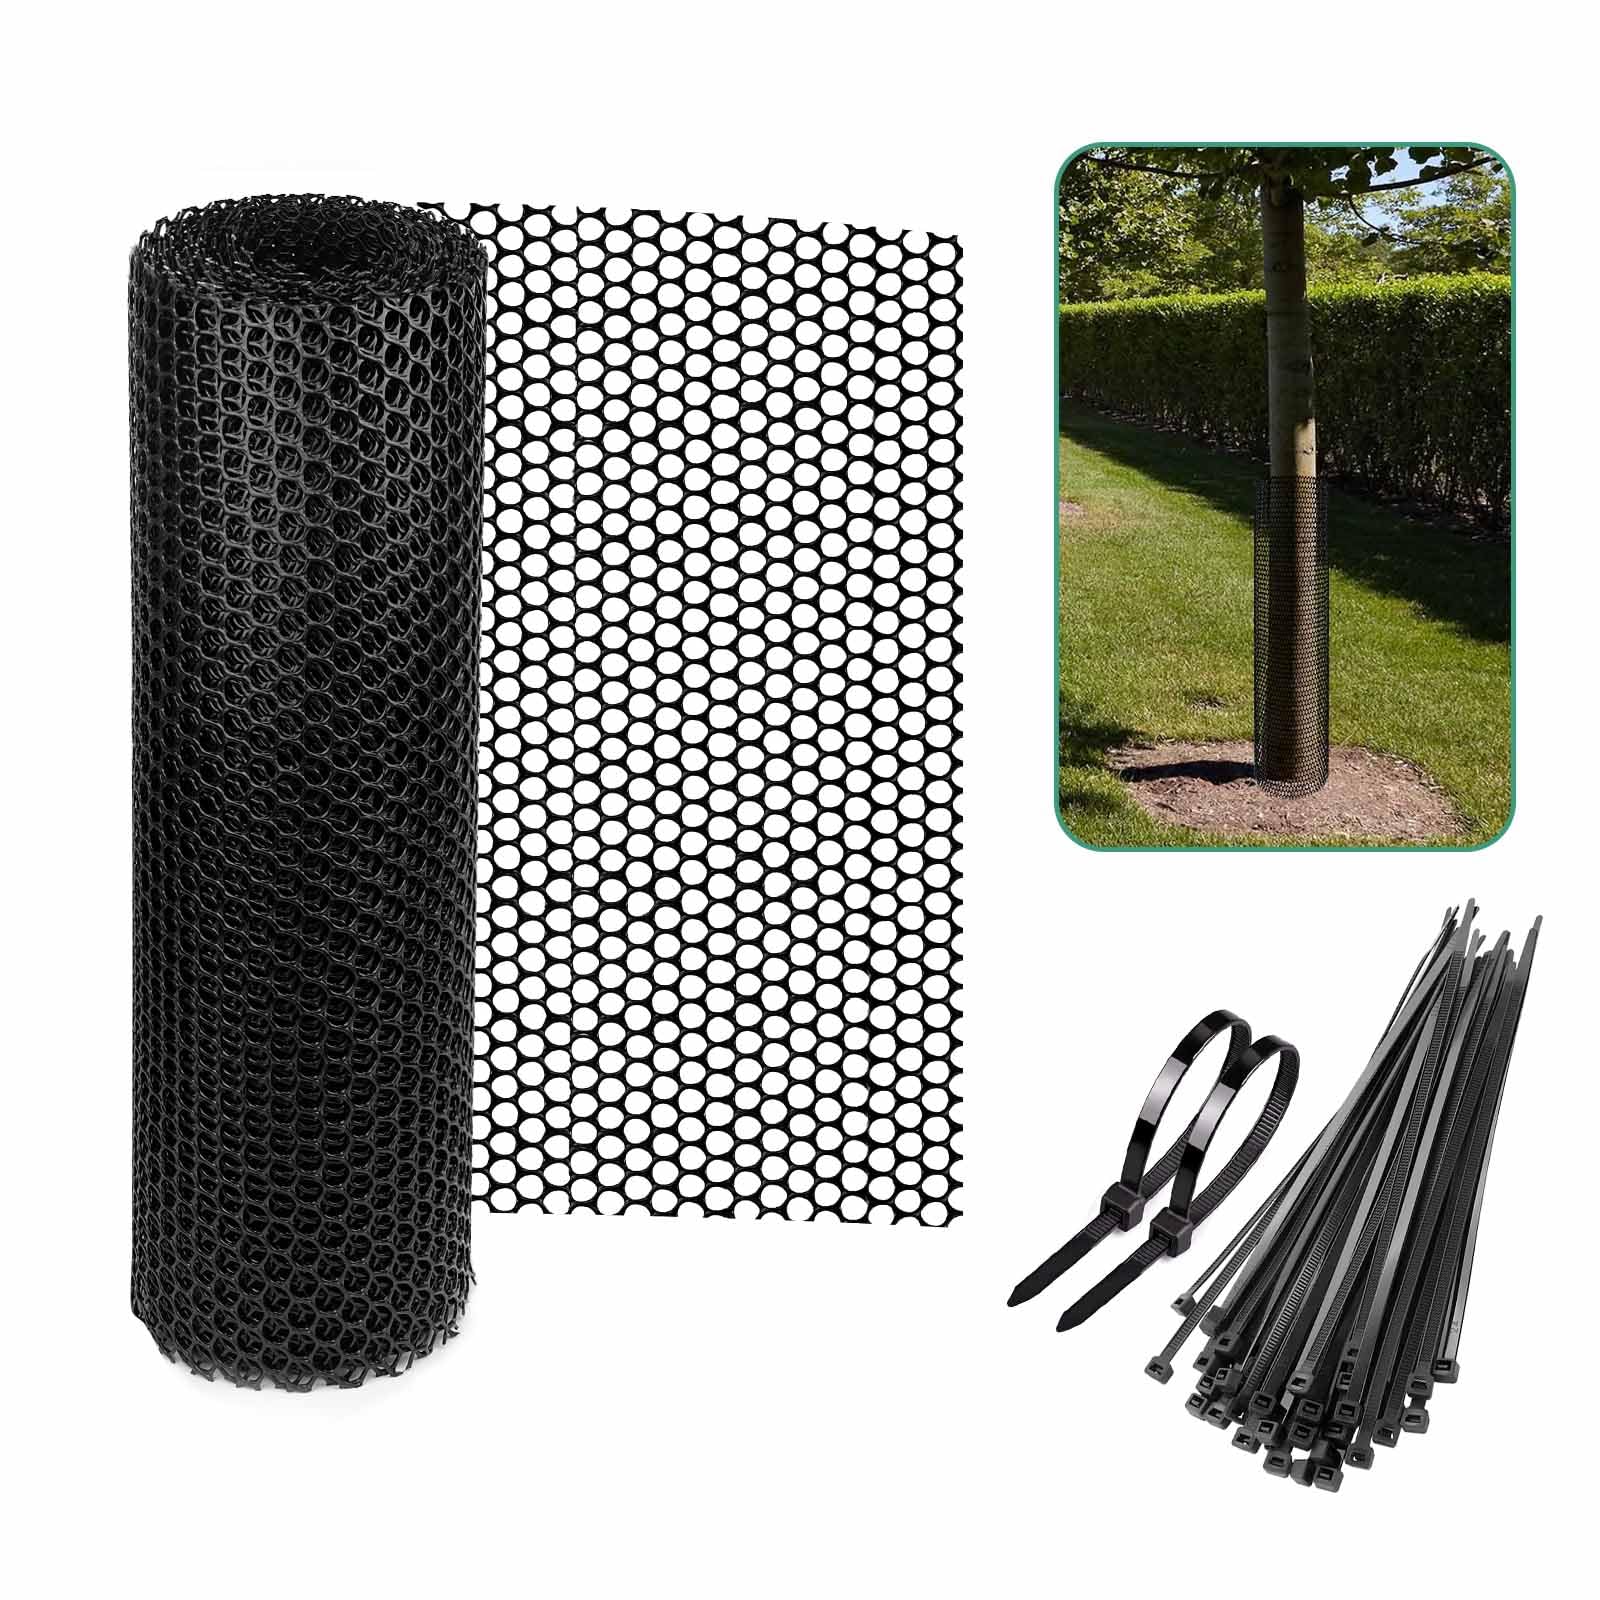 FUZEWANLI 19.6 FT Tree Protectors，Tree Trunk Protector Guard,Tree Guards for Fruit Trees,Tree Bark Repair for Tree Protectors from Deer Mowers Trimmers.